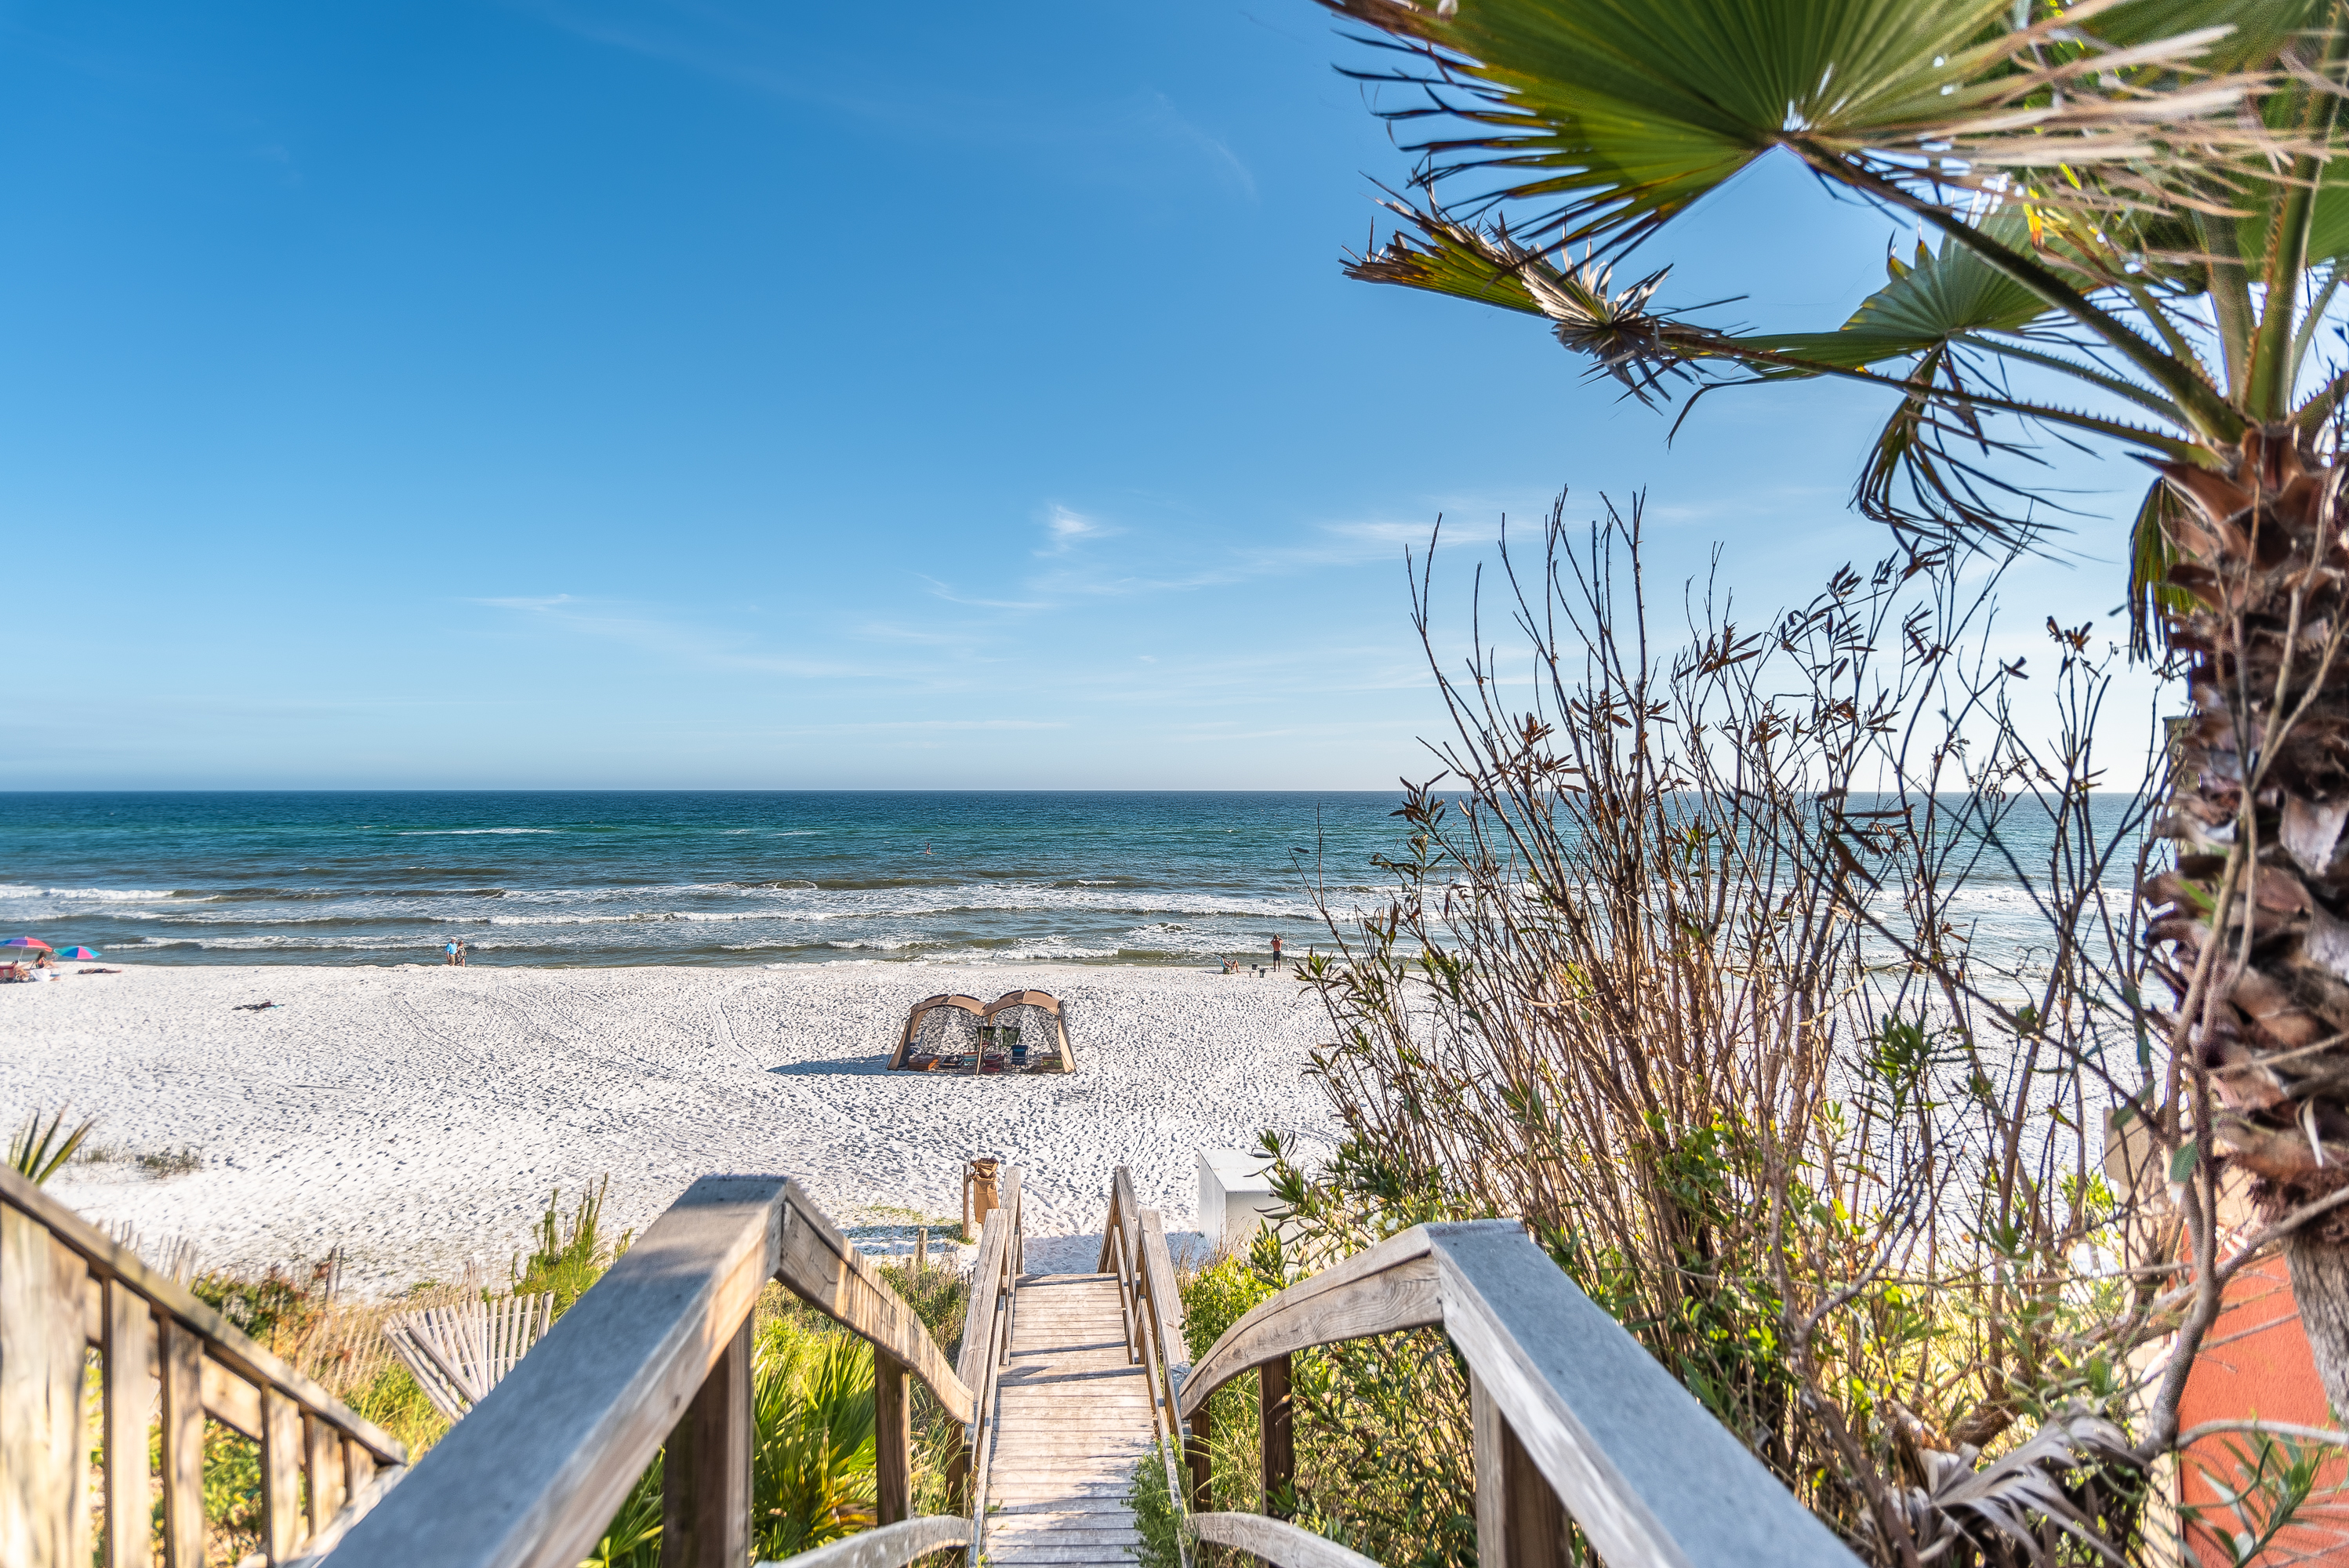 As a leading luxury real estate brand, you can trust Go to the Beach Real Estate in Santa Rosa Beach, FL with your search. Call our office to get started.